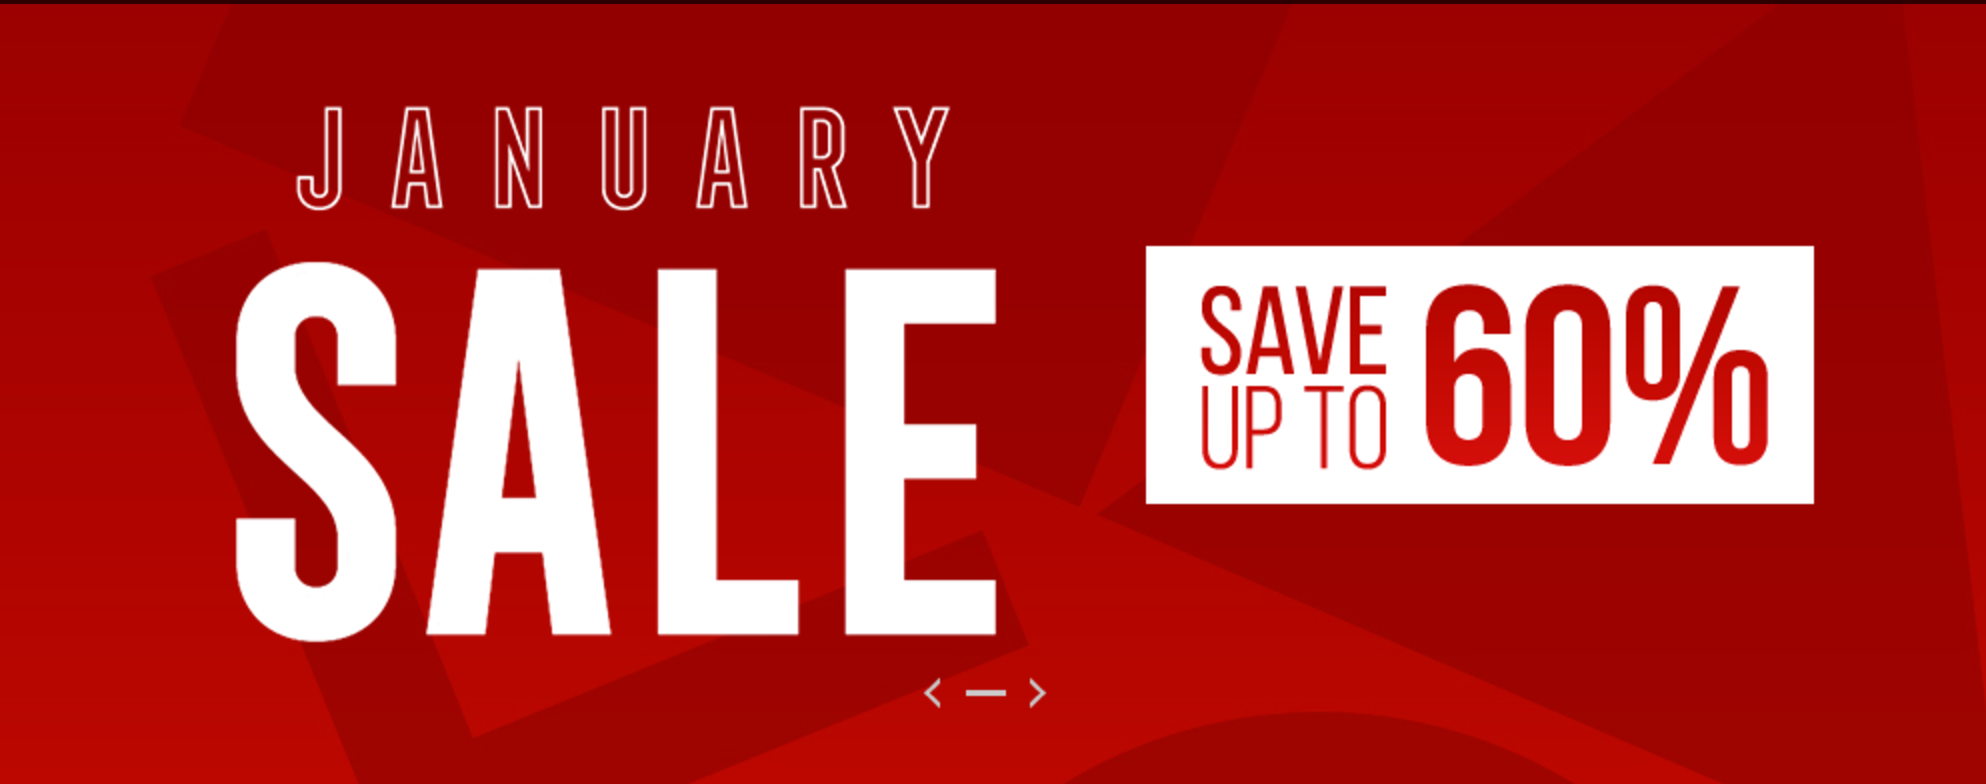 The january sales started and. January sale PS Store. December sale. Bargain sale. Sale up to 60.